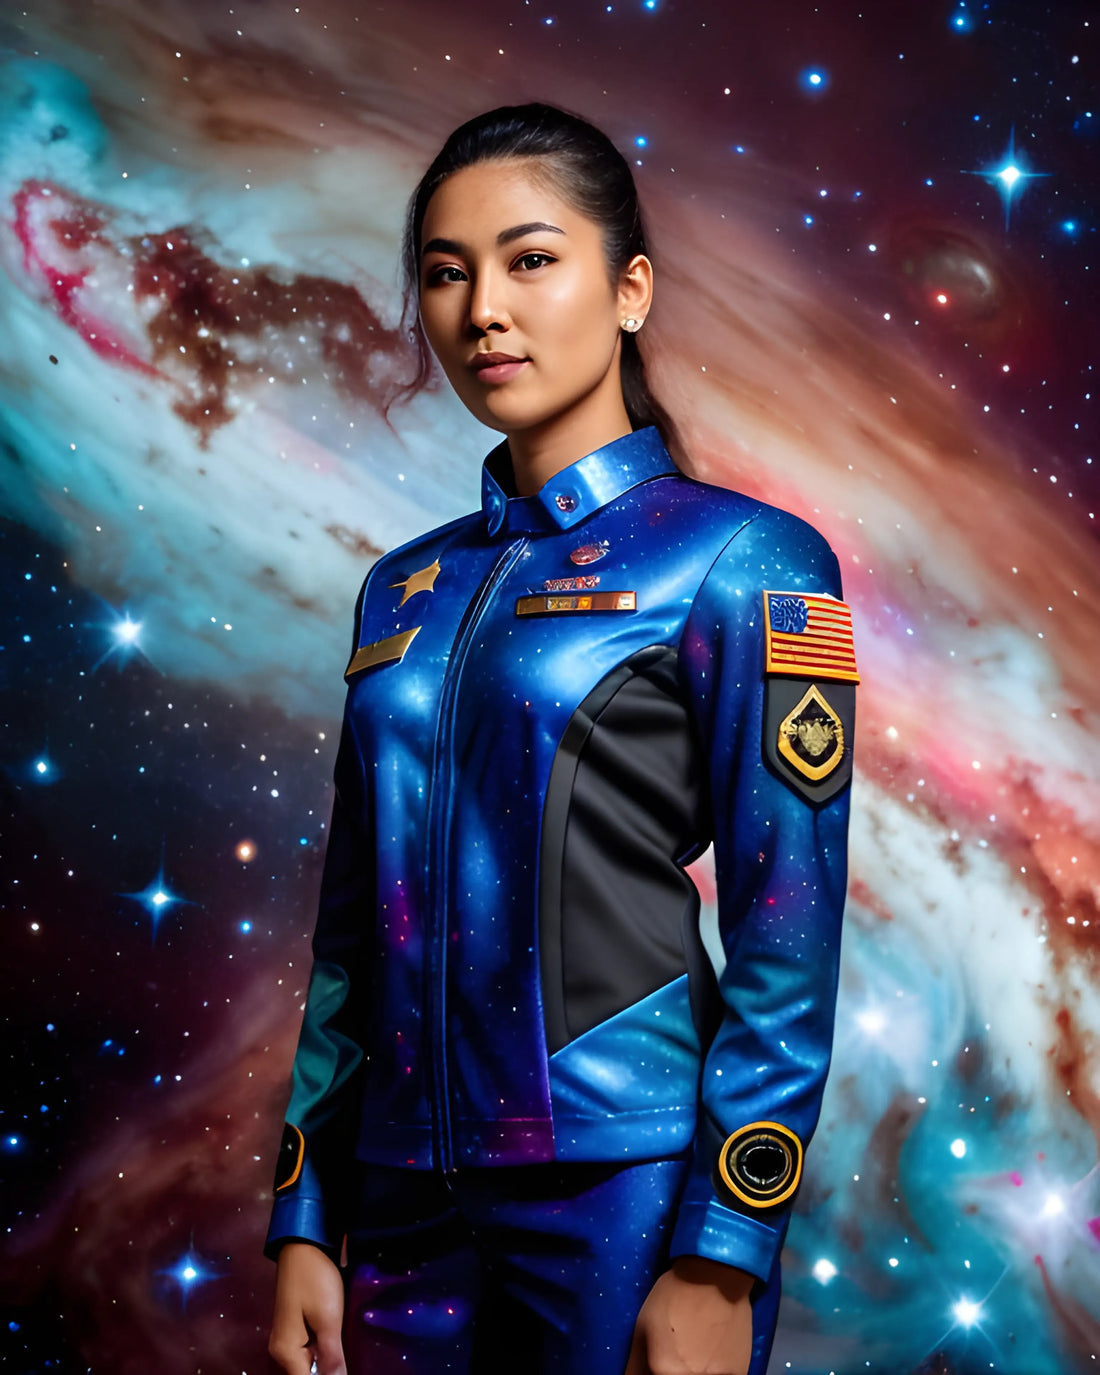 The Nebula Palace: Nurturing the Soul: Exploring the Intersection of Spirituality and Veterans' Well-Being - Army Veteran woman wearing a nebula themed army suit.